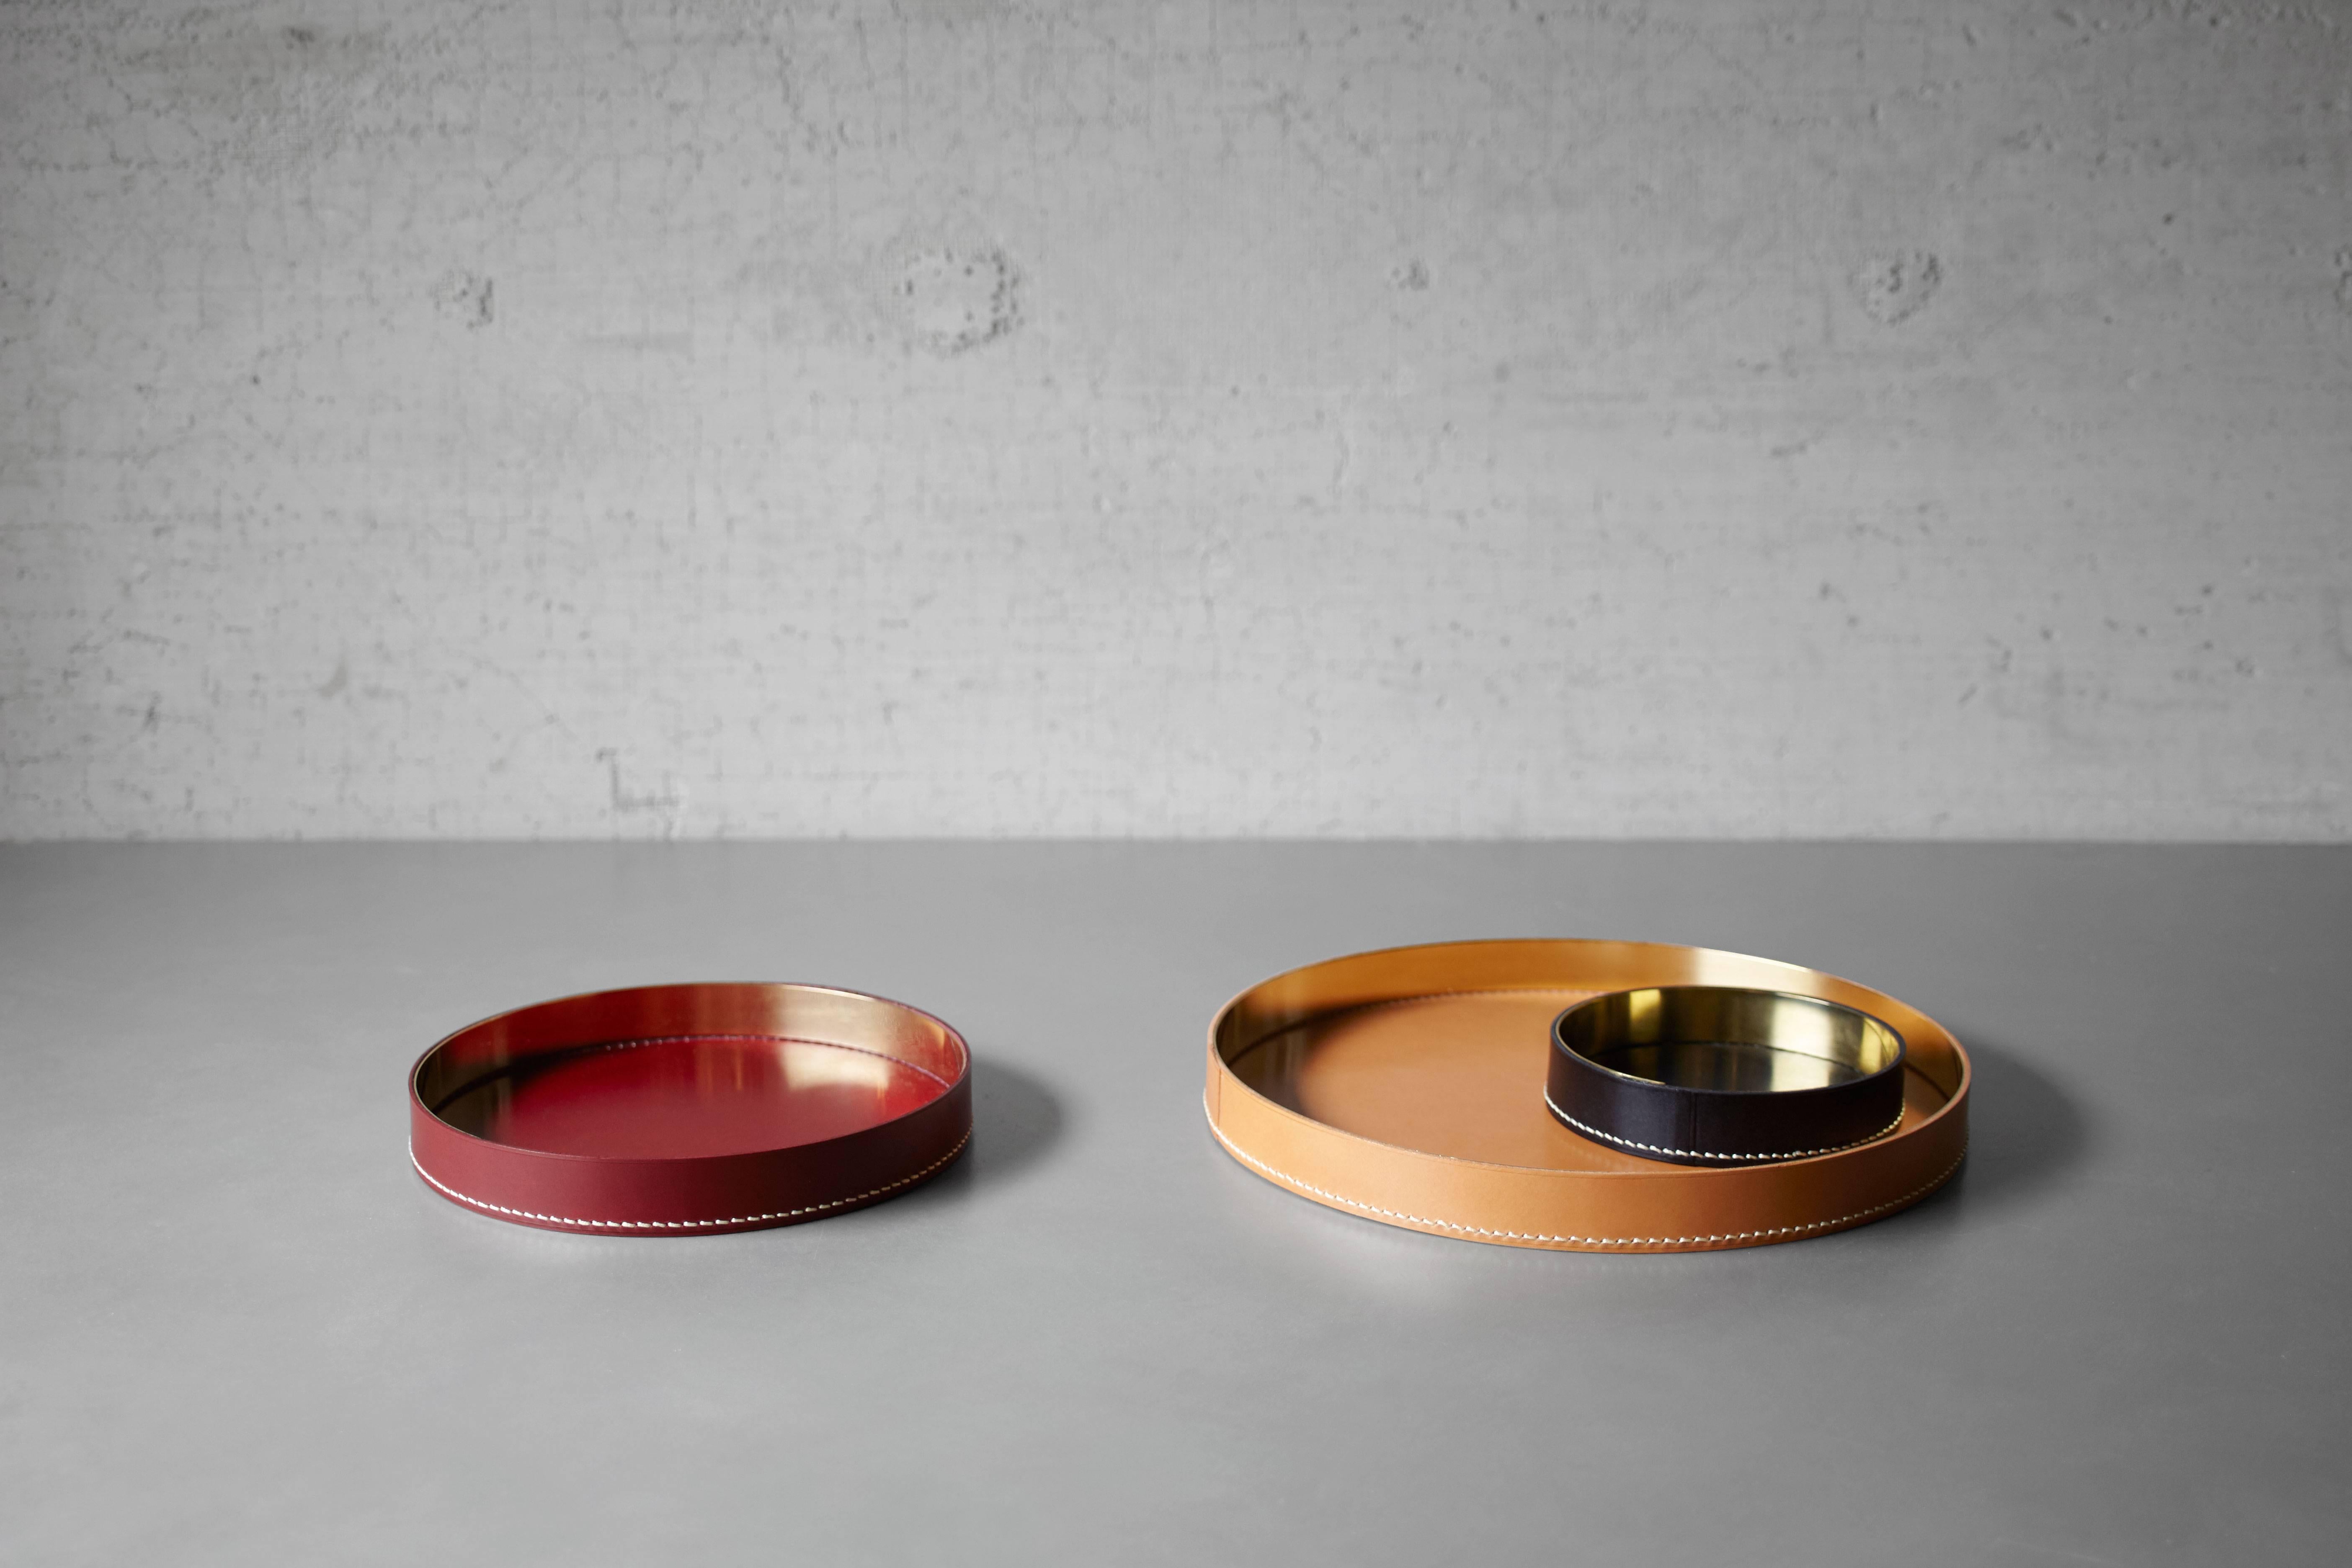 Hand-Crafted Contemporary Italian Leather & Swedish Brass Modern Minimalist Artisan Tray Set For Sale